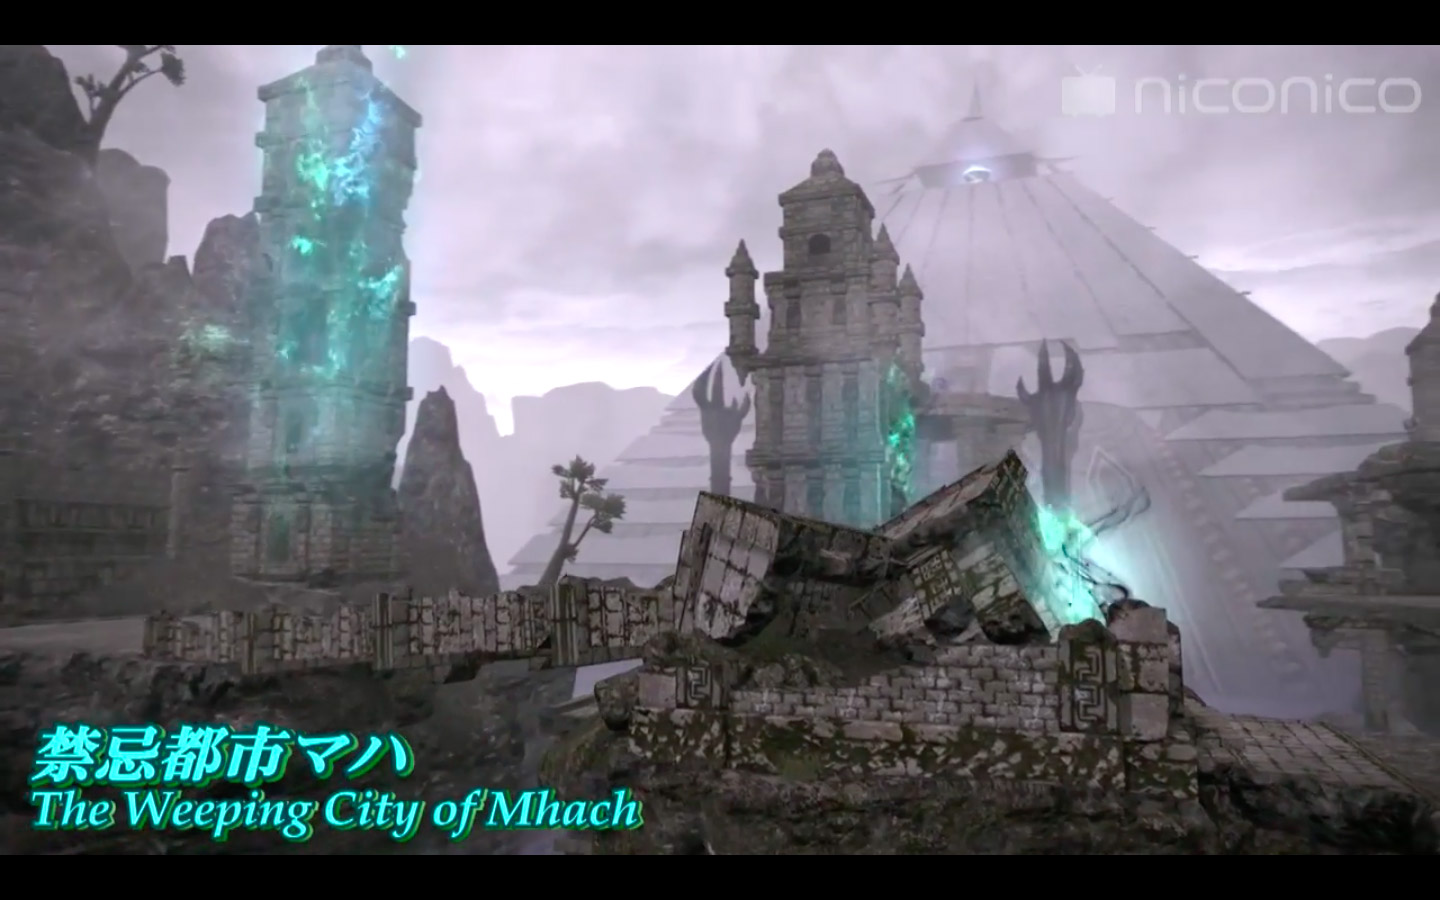 Final Fantasy XIV Patch 3.3 Weeping City of Mhach